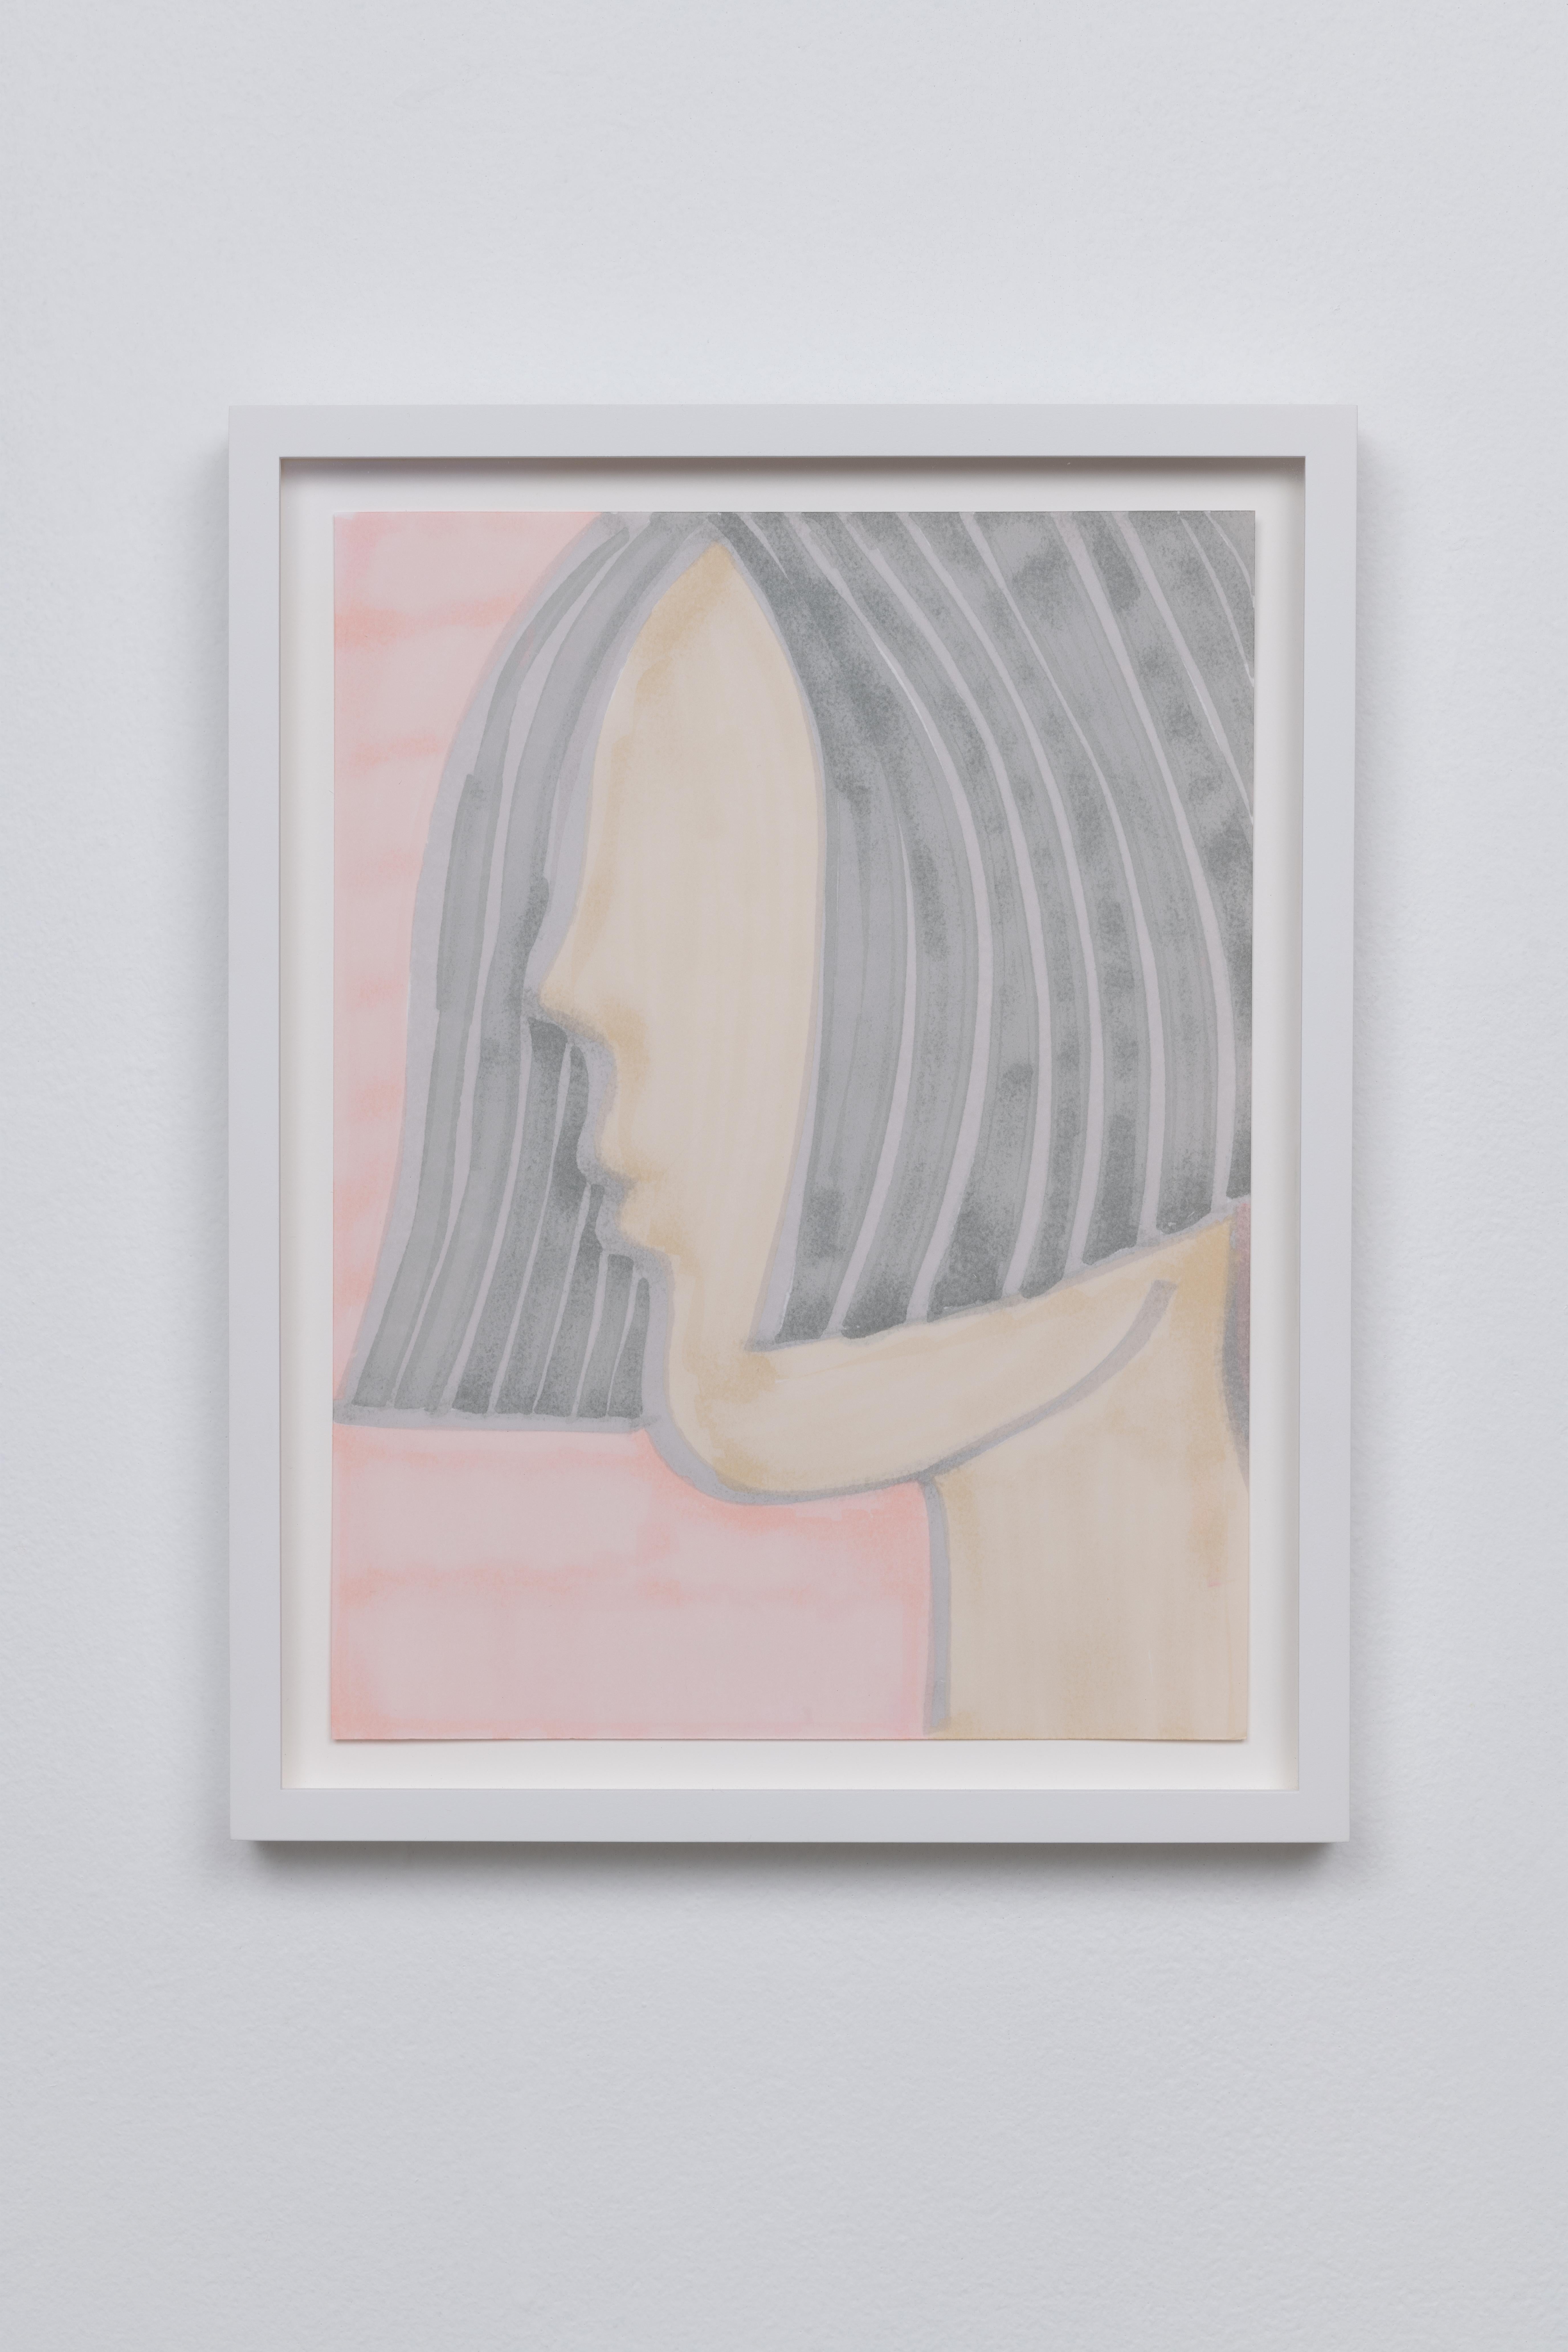 Body I - 2019 Framed Drawing - Contemporary Pink Nude 12 x 9in Surreal Face Girl